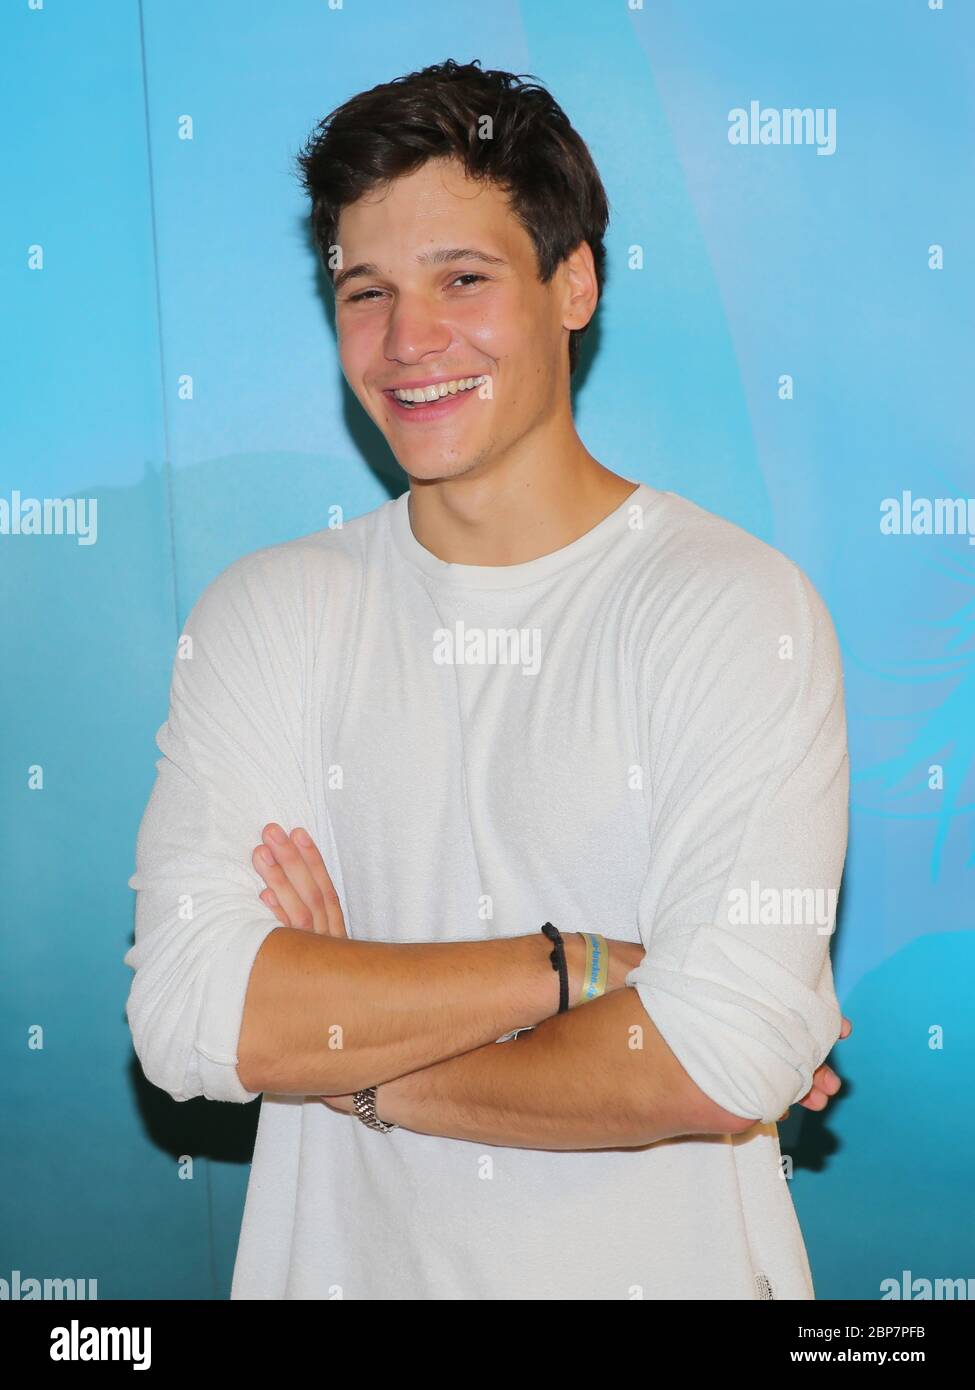 German pop singer and songwriter Wincent Weiss at Stars for Free 2019 in  Magdeburg Stock Photo - Alamy